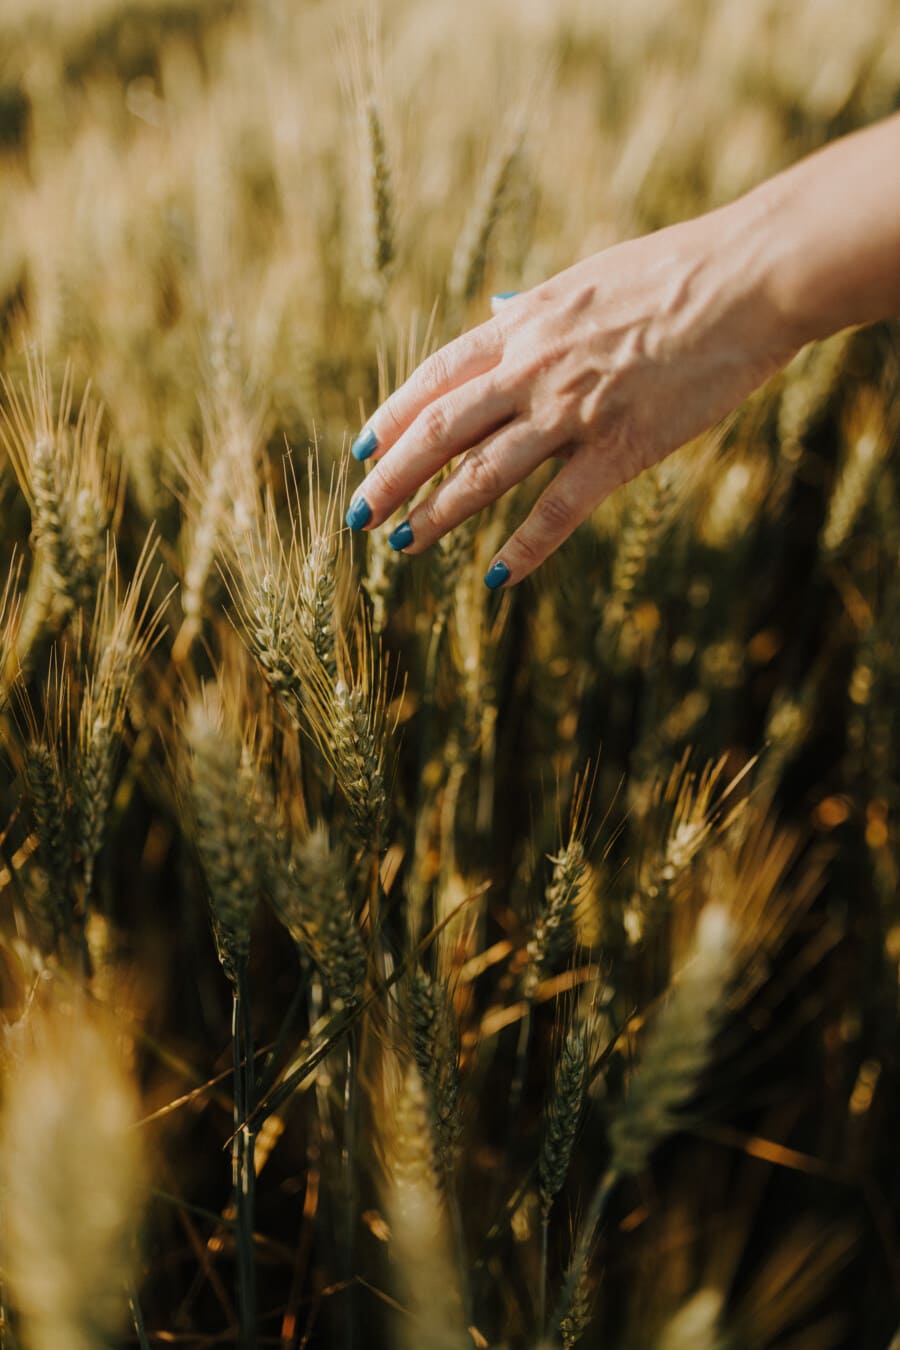 hand, woman, wheat, wheatfield, touch, cereal, agriculture, grain, field, straw